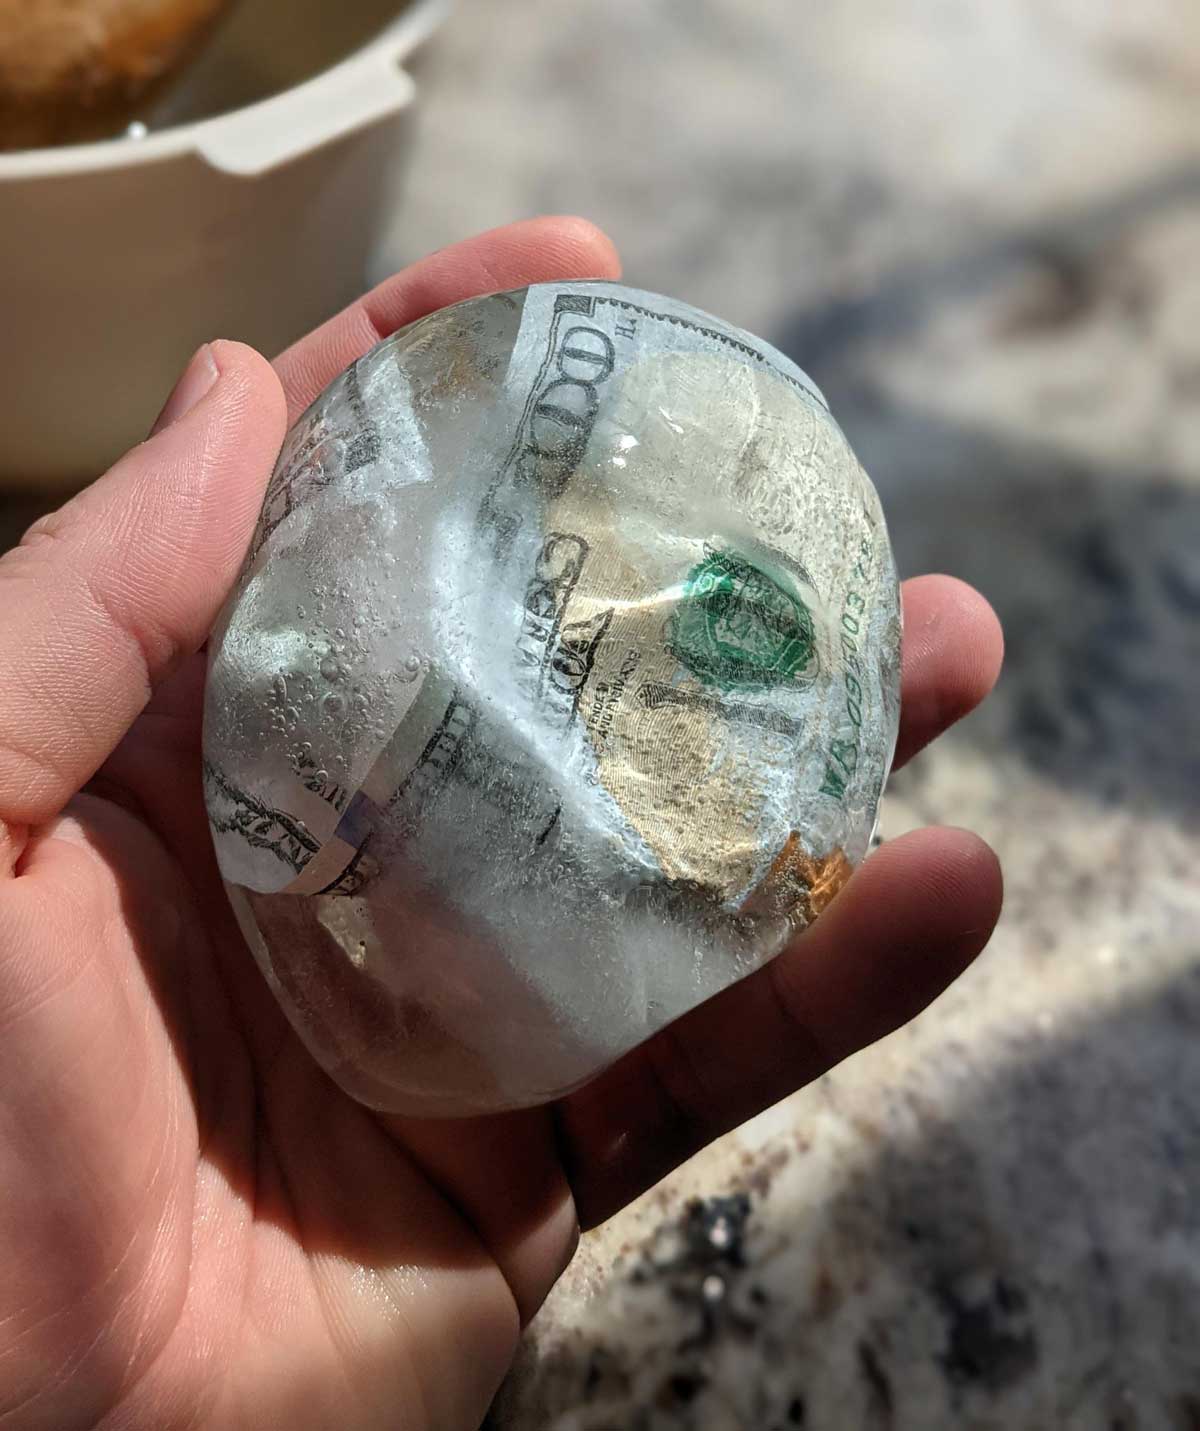 My son said he just wanted some cold hard cash for his birthday